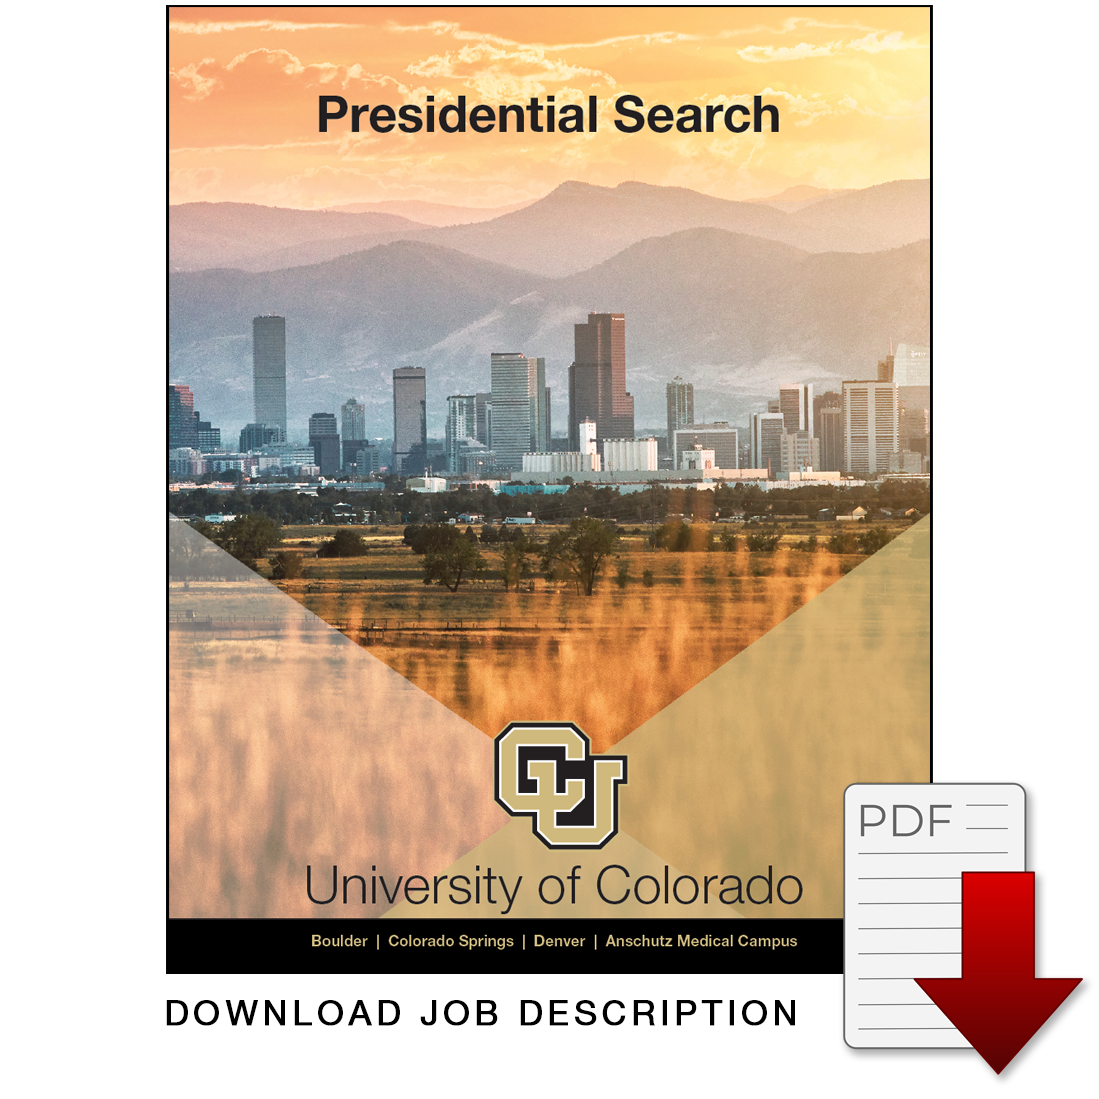 Download the job description for the job of President of the University of Colorado